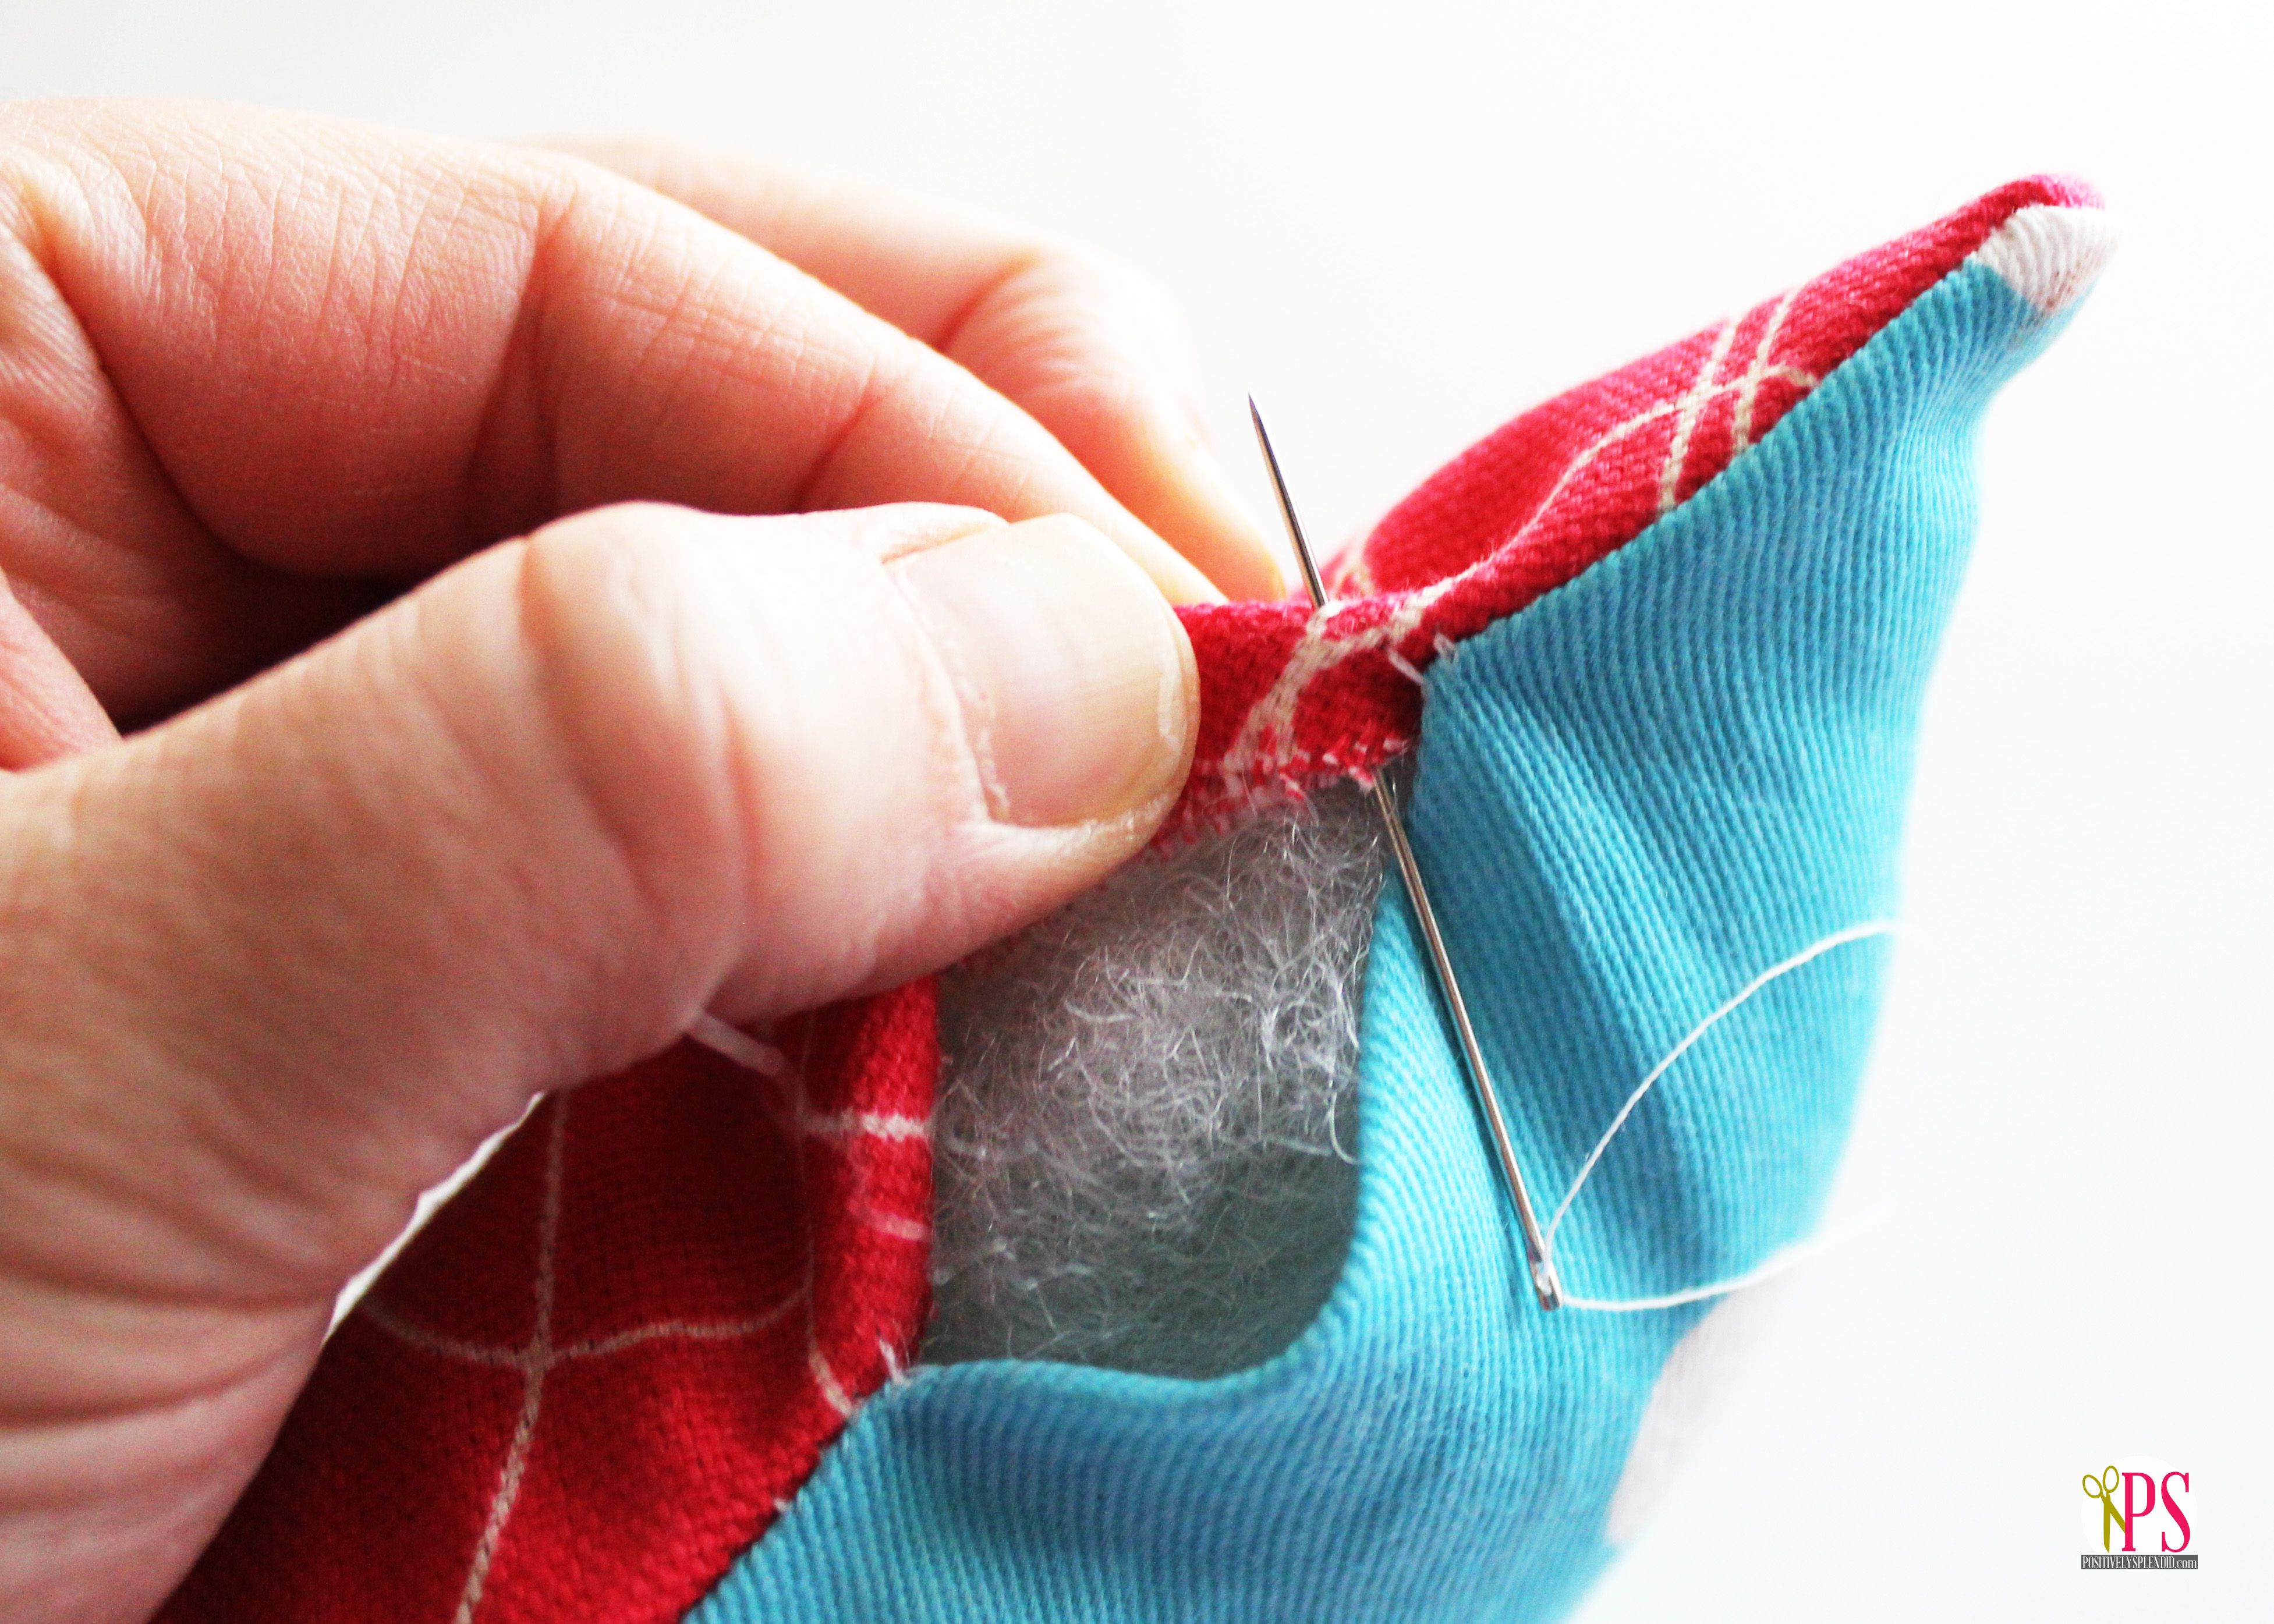 How To Do An Invisible Stitch (Ladder Stitch) by Hand